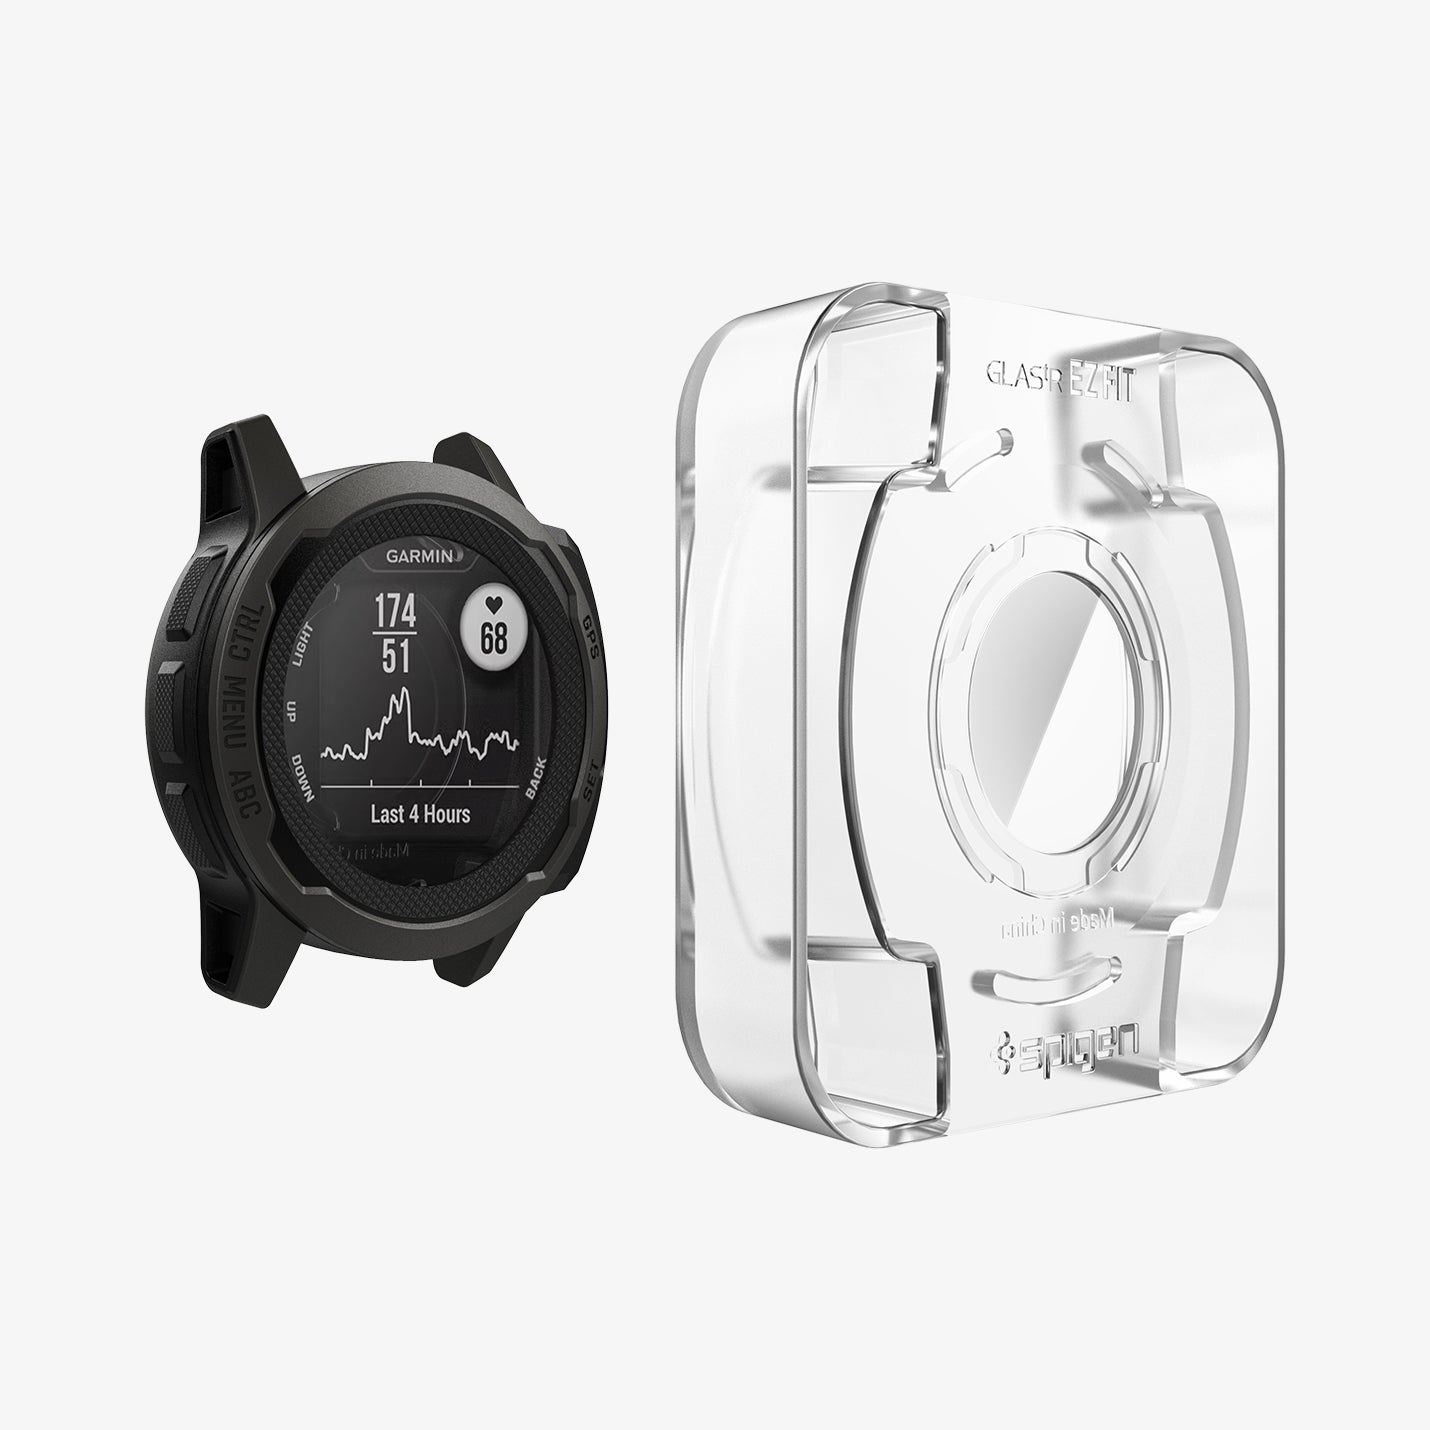 AGL04797 - Garmin Instinct 2 Screen Protector EZ FIT Glas.tR showing the ez fit tray hovering in front of the watch face